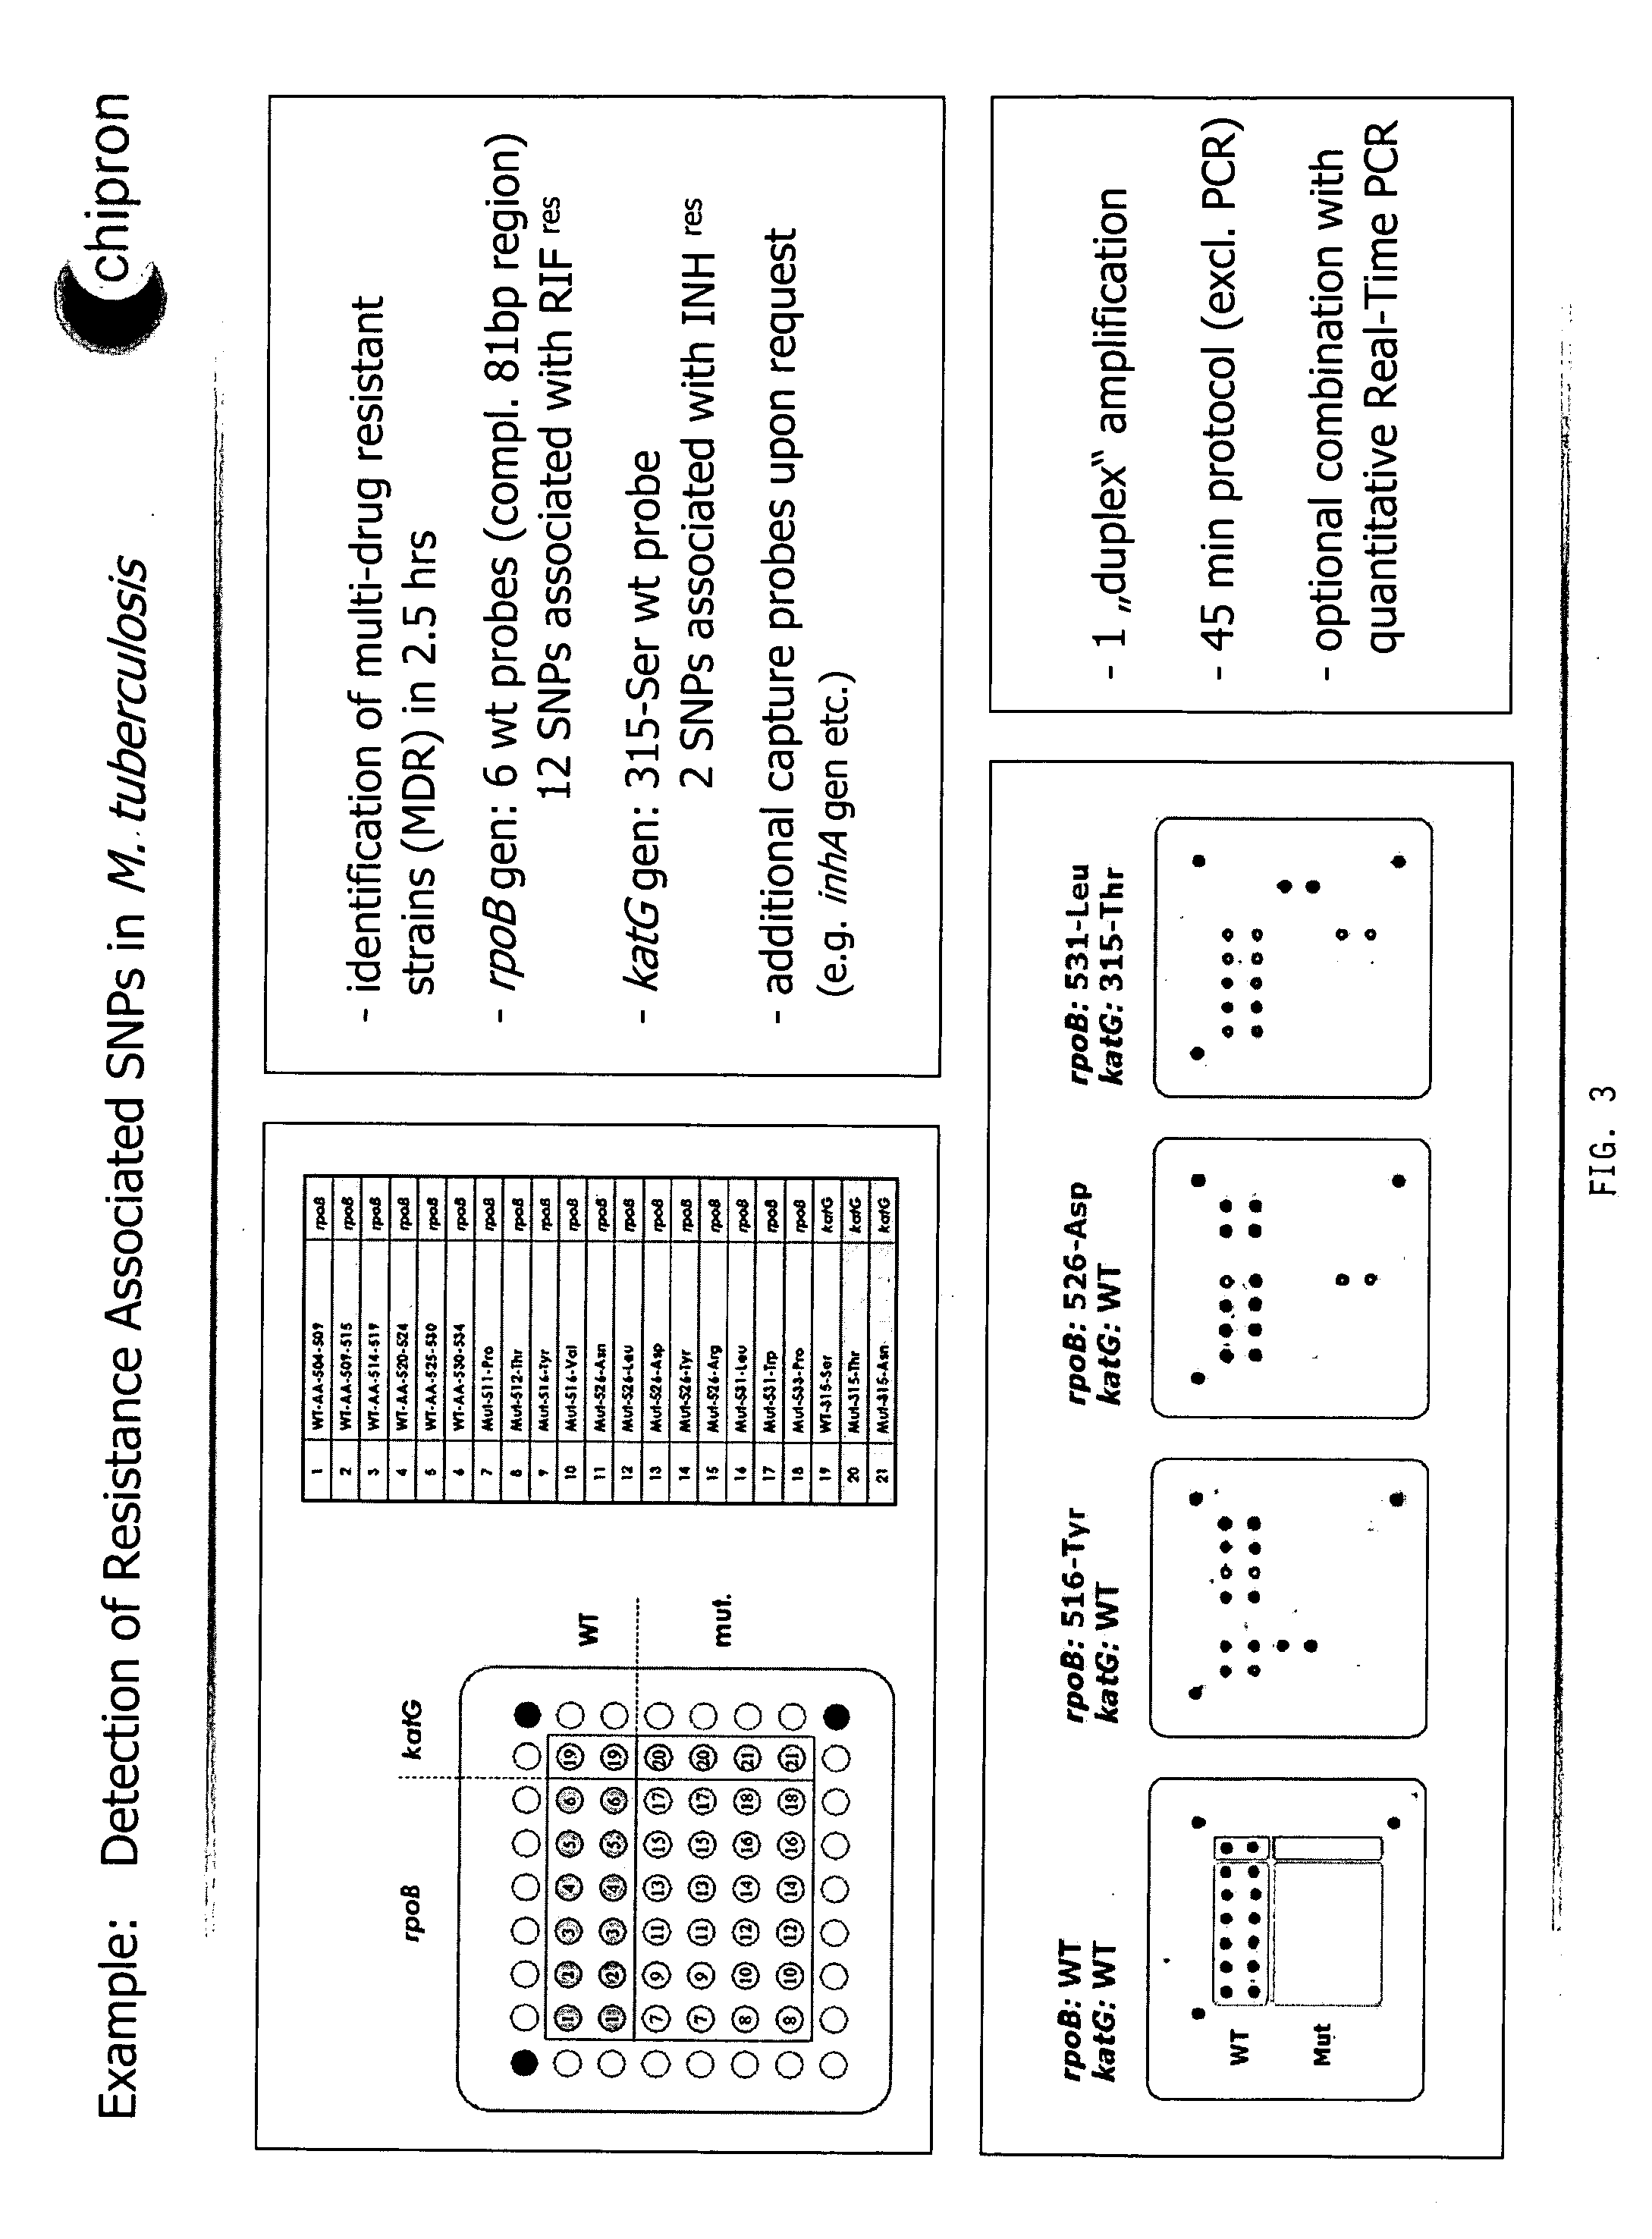 Combination comprising biochip and optical detection device